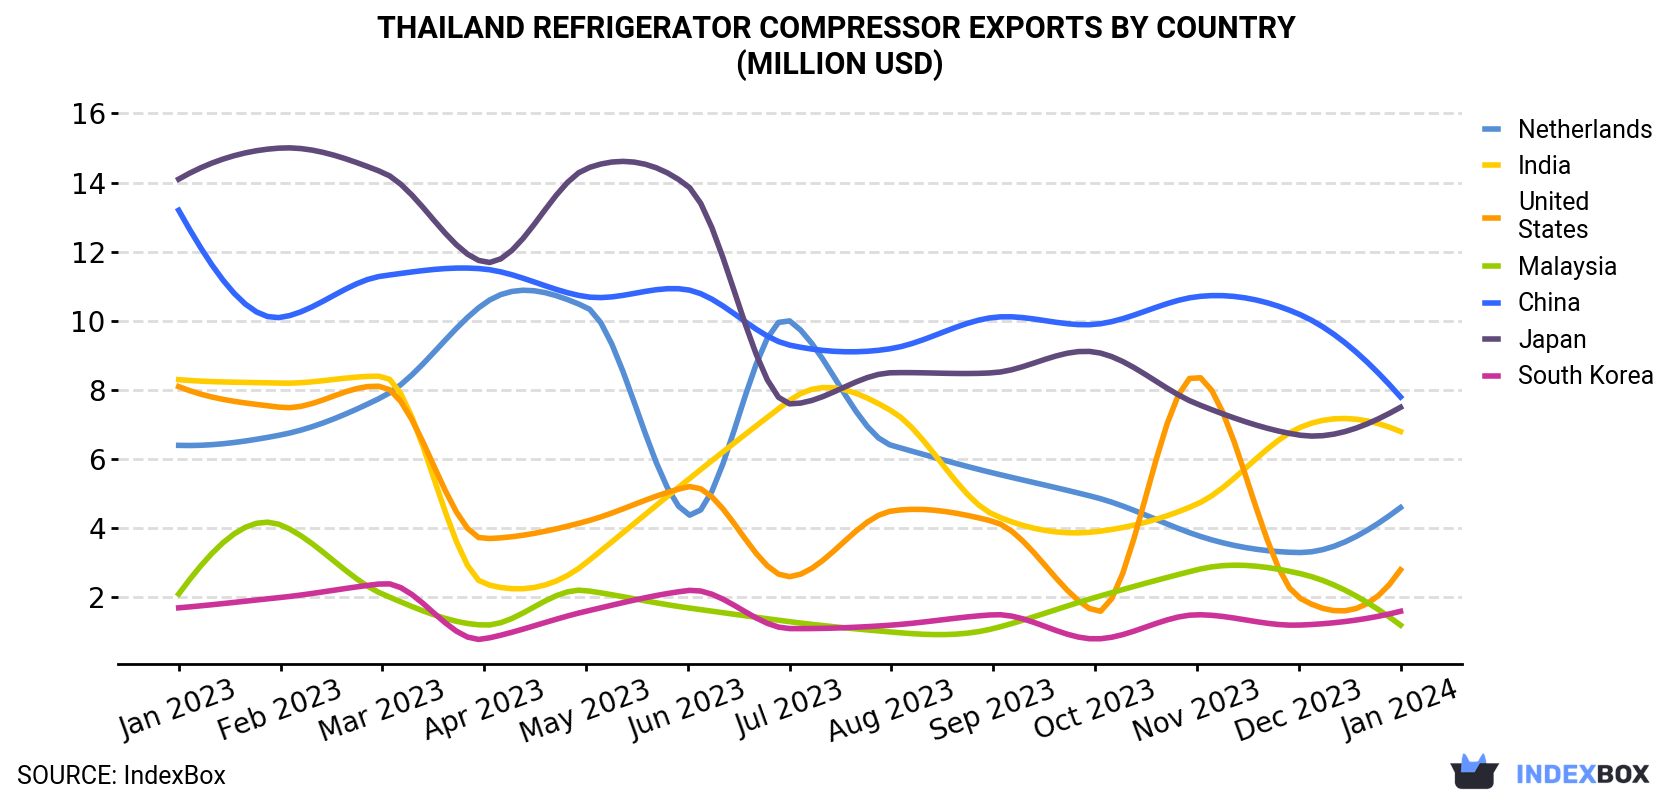 Thailand Refrigerator Compressor Exports By Country (Million USD)